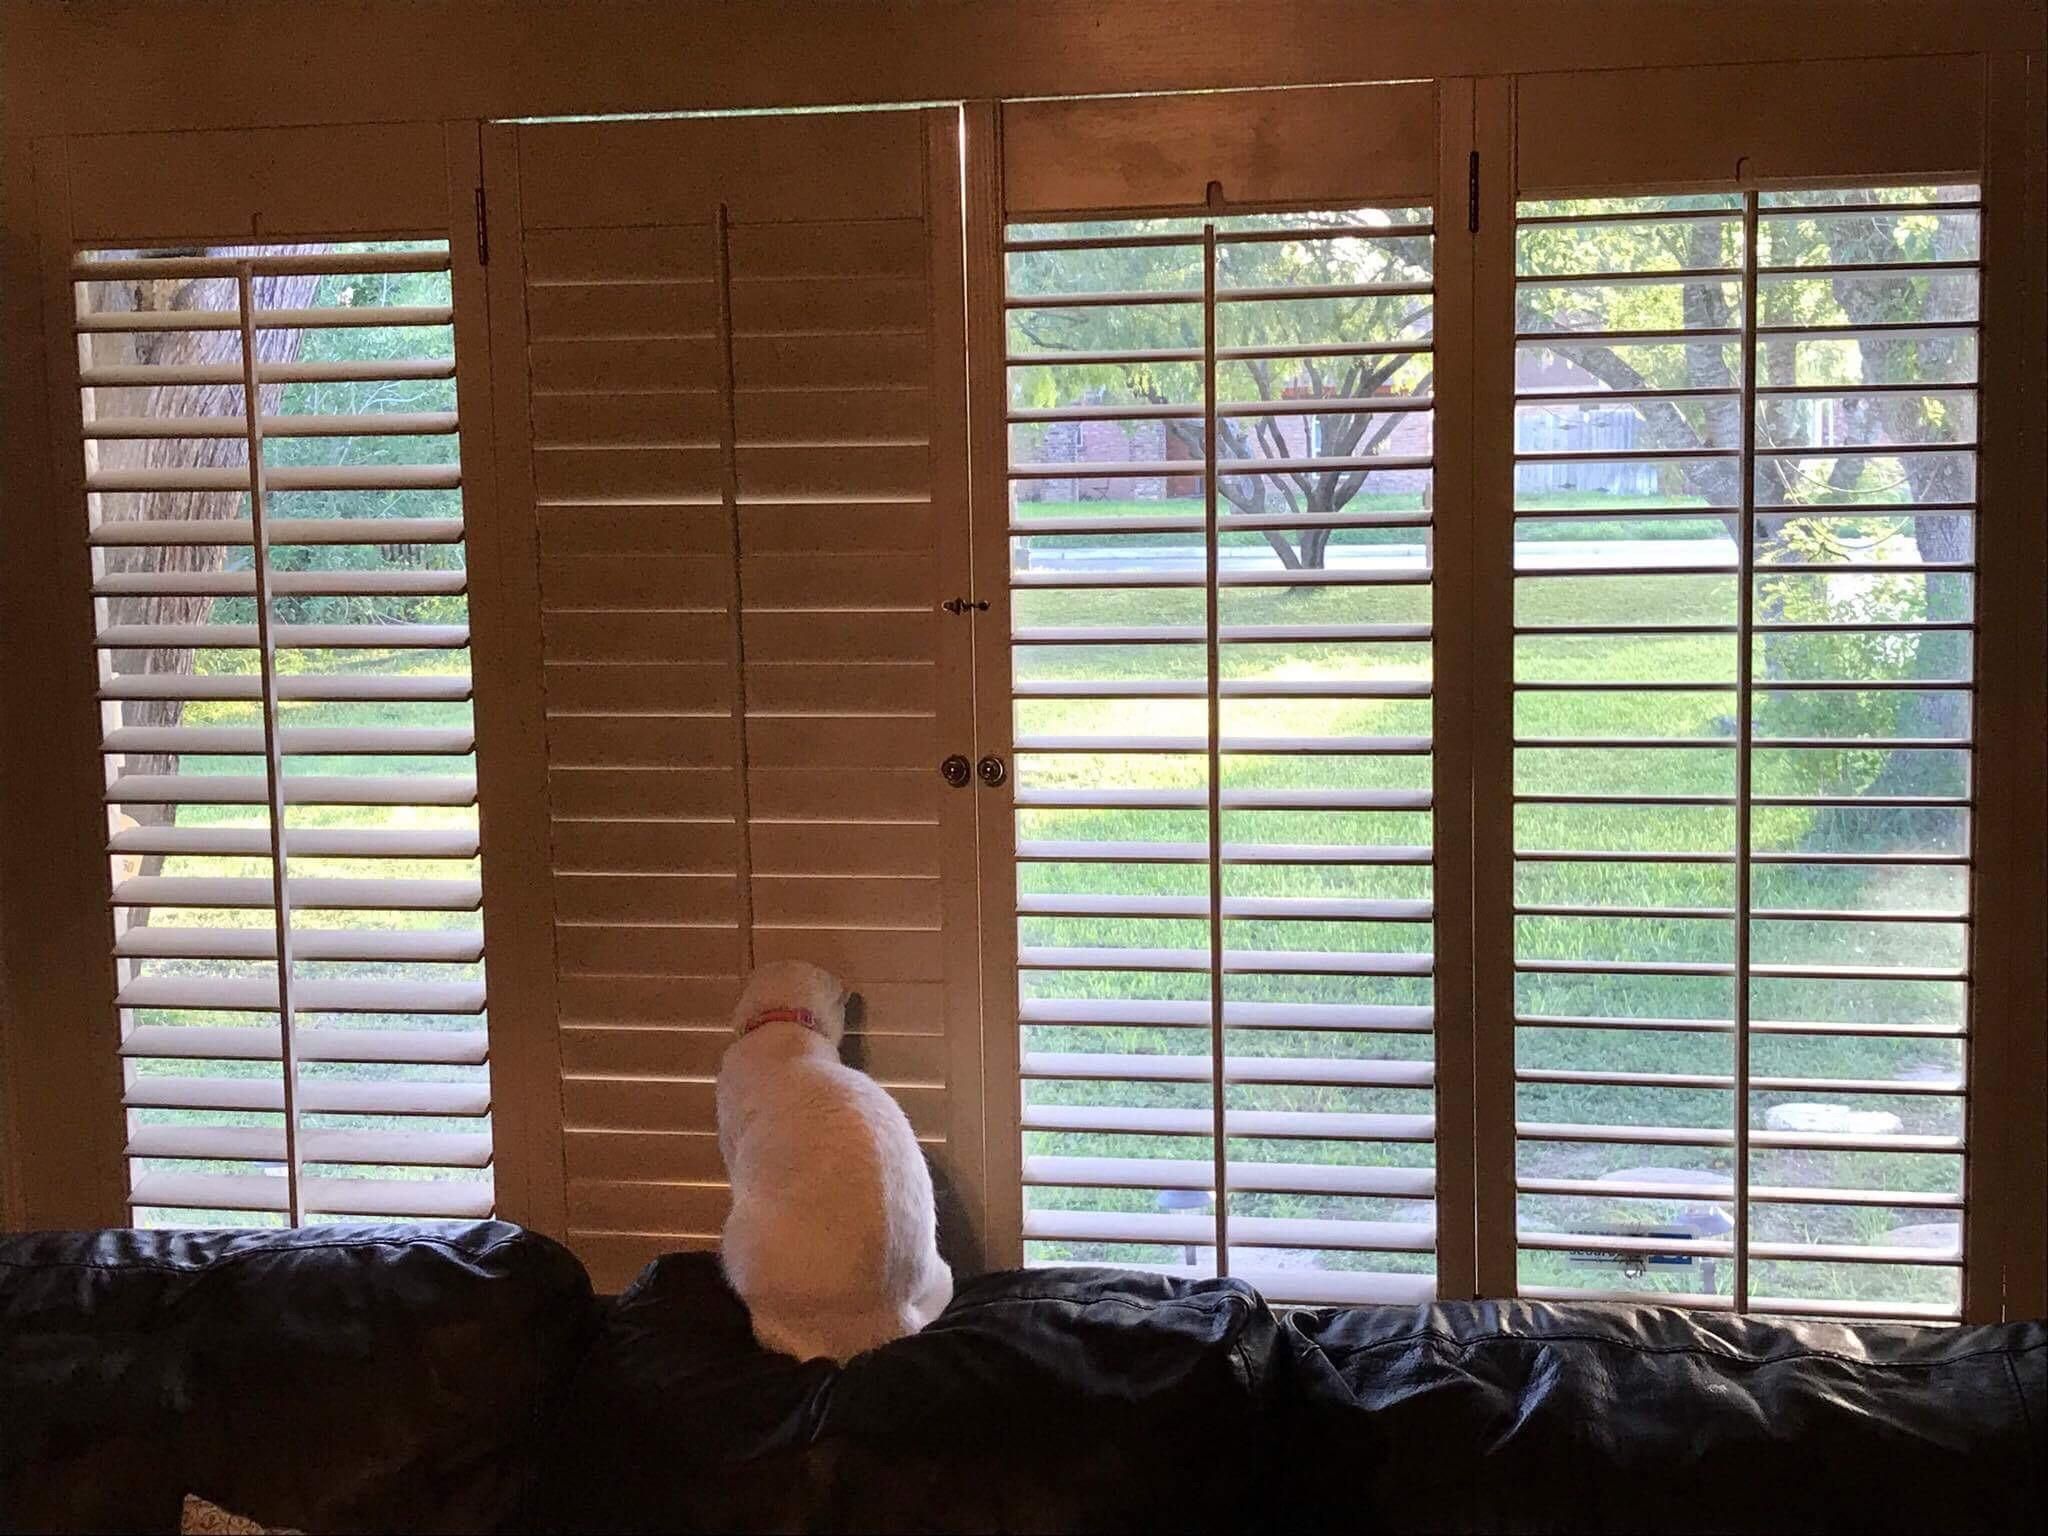 My friends cat looks at the only closed window